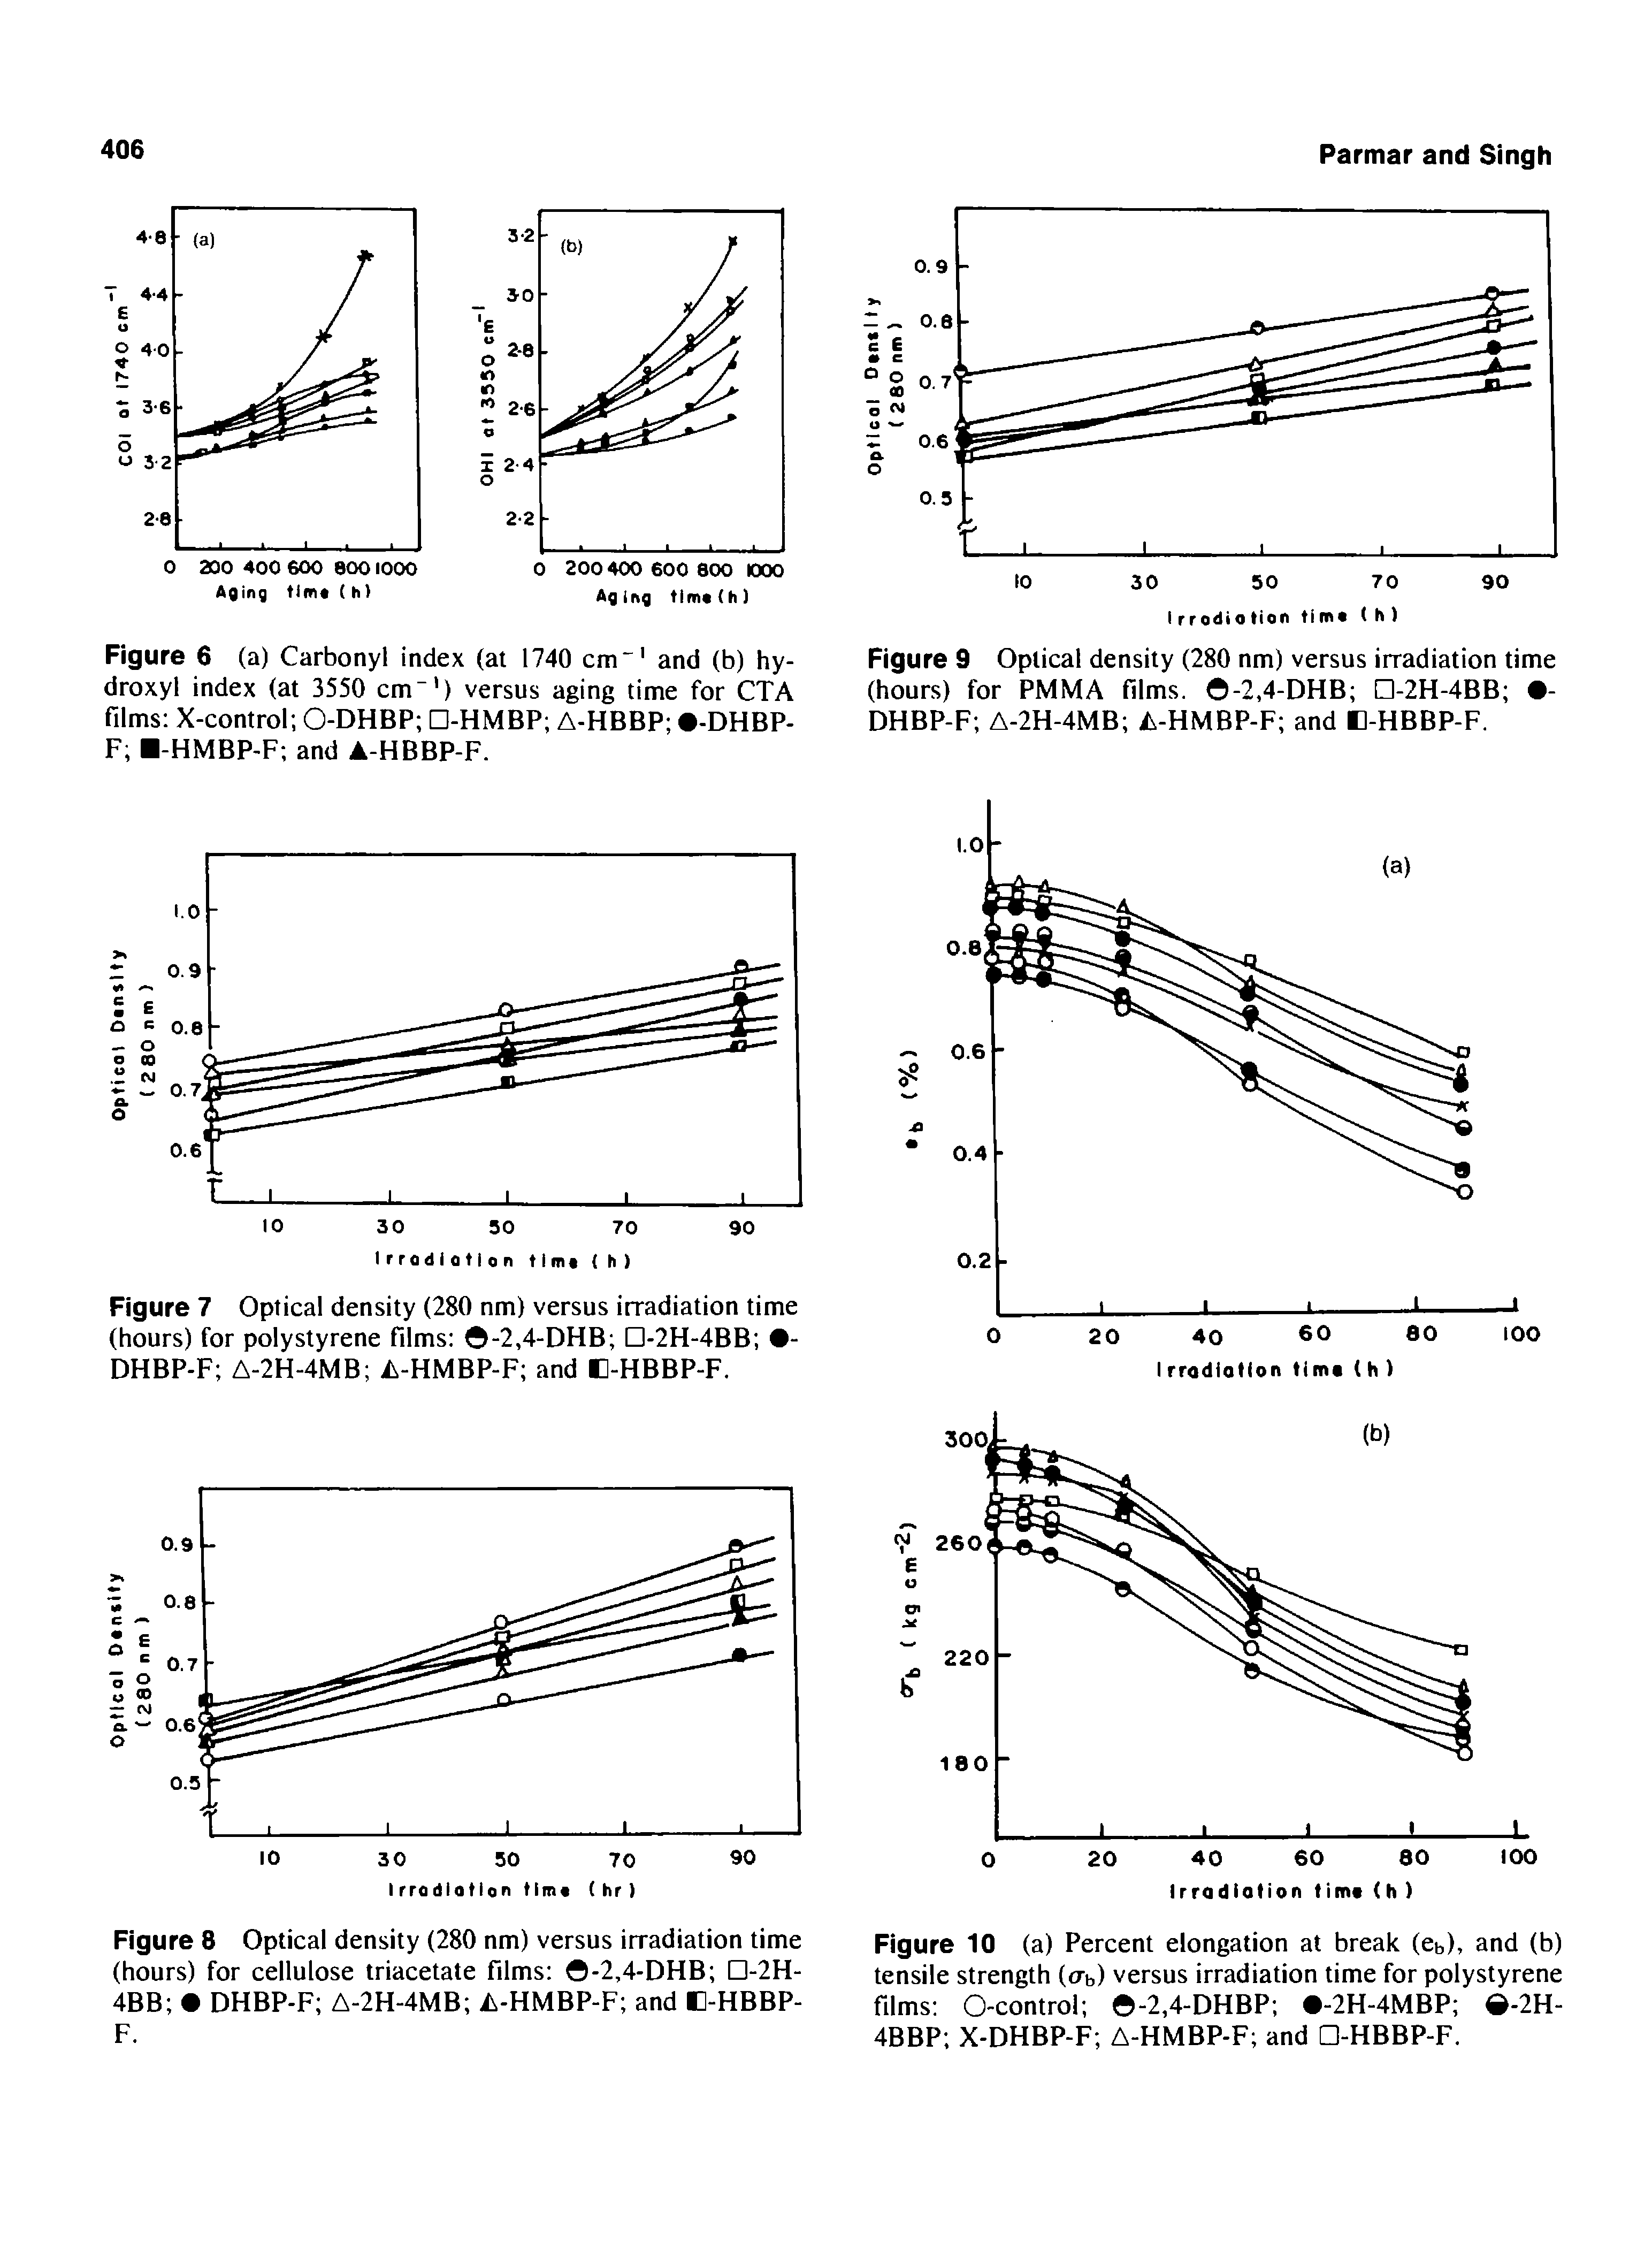 Figure 8 Optical density (280 nm) versus irradiation time (hours) for cellulose triacetate films 0-2,4-DHB D-2H-4BB DHBP-F A-2H-4MB A-HMBP-F and B-HBBP-F.